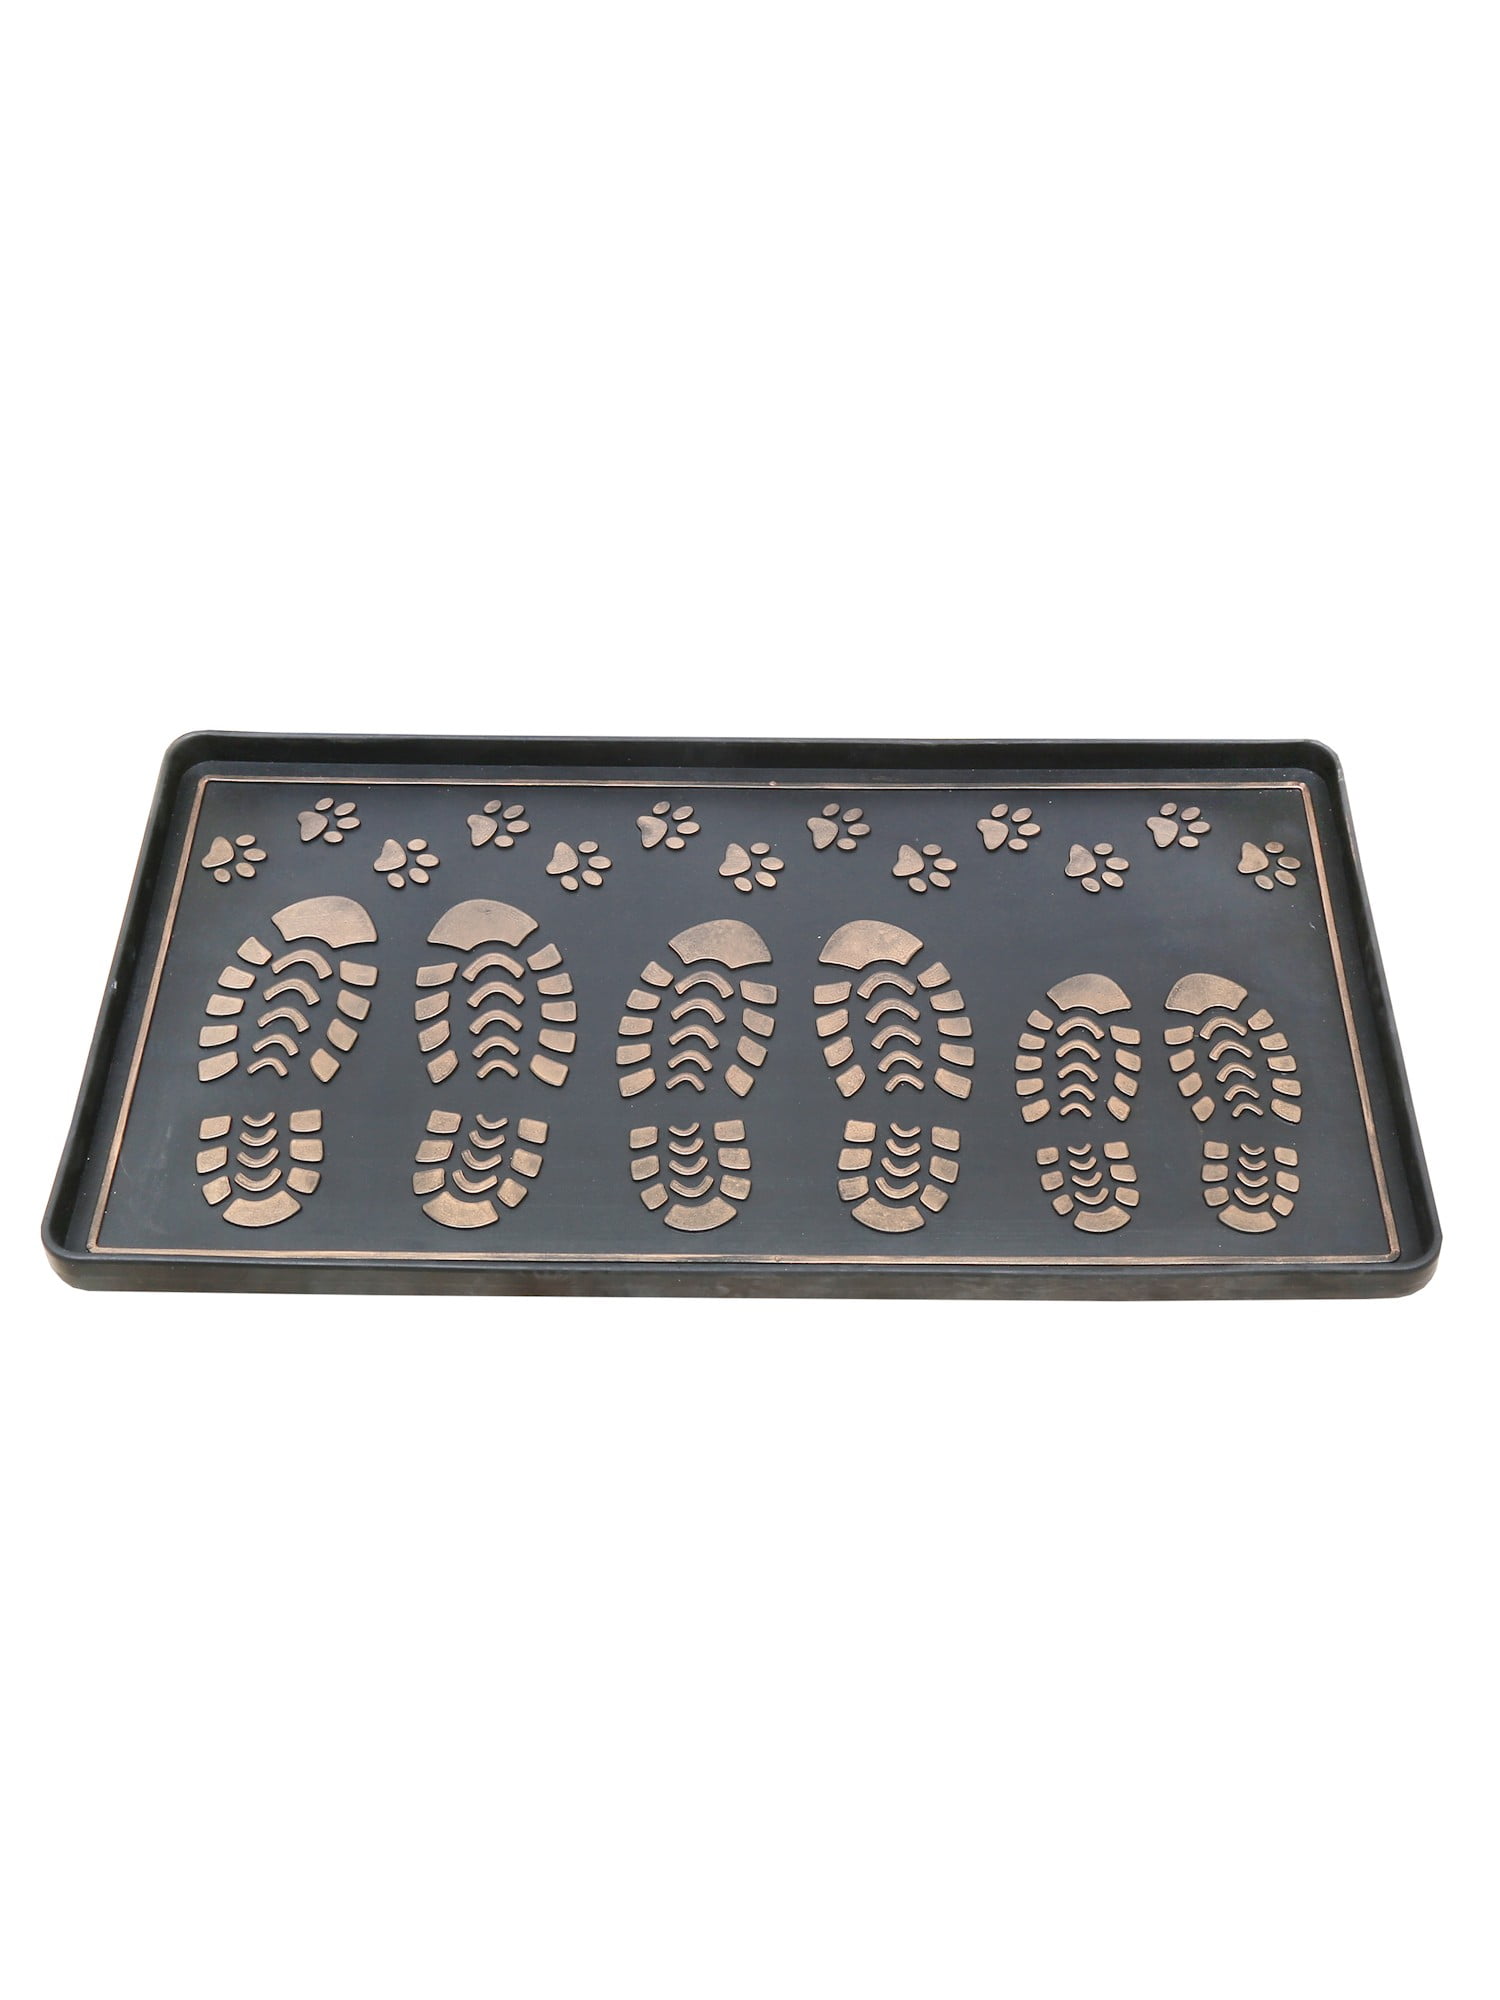 BBA SUNRISE Rubber Boot Tray Wet Shoe Tray for Entryway Indoor